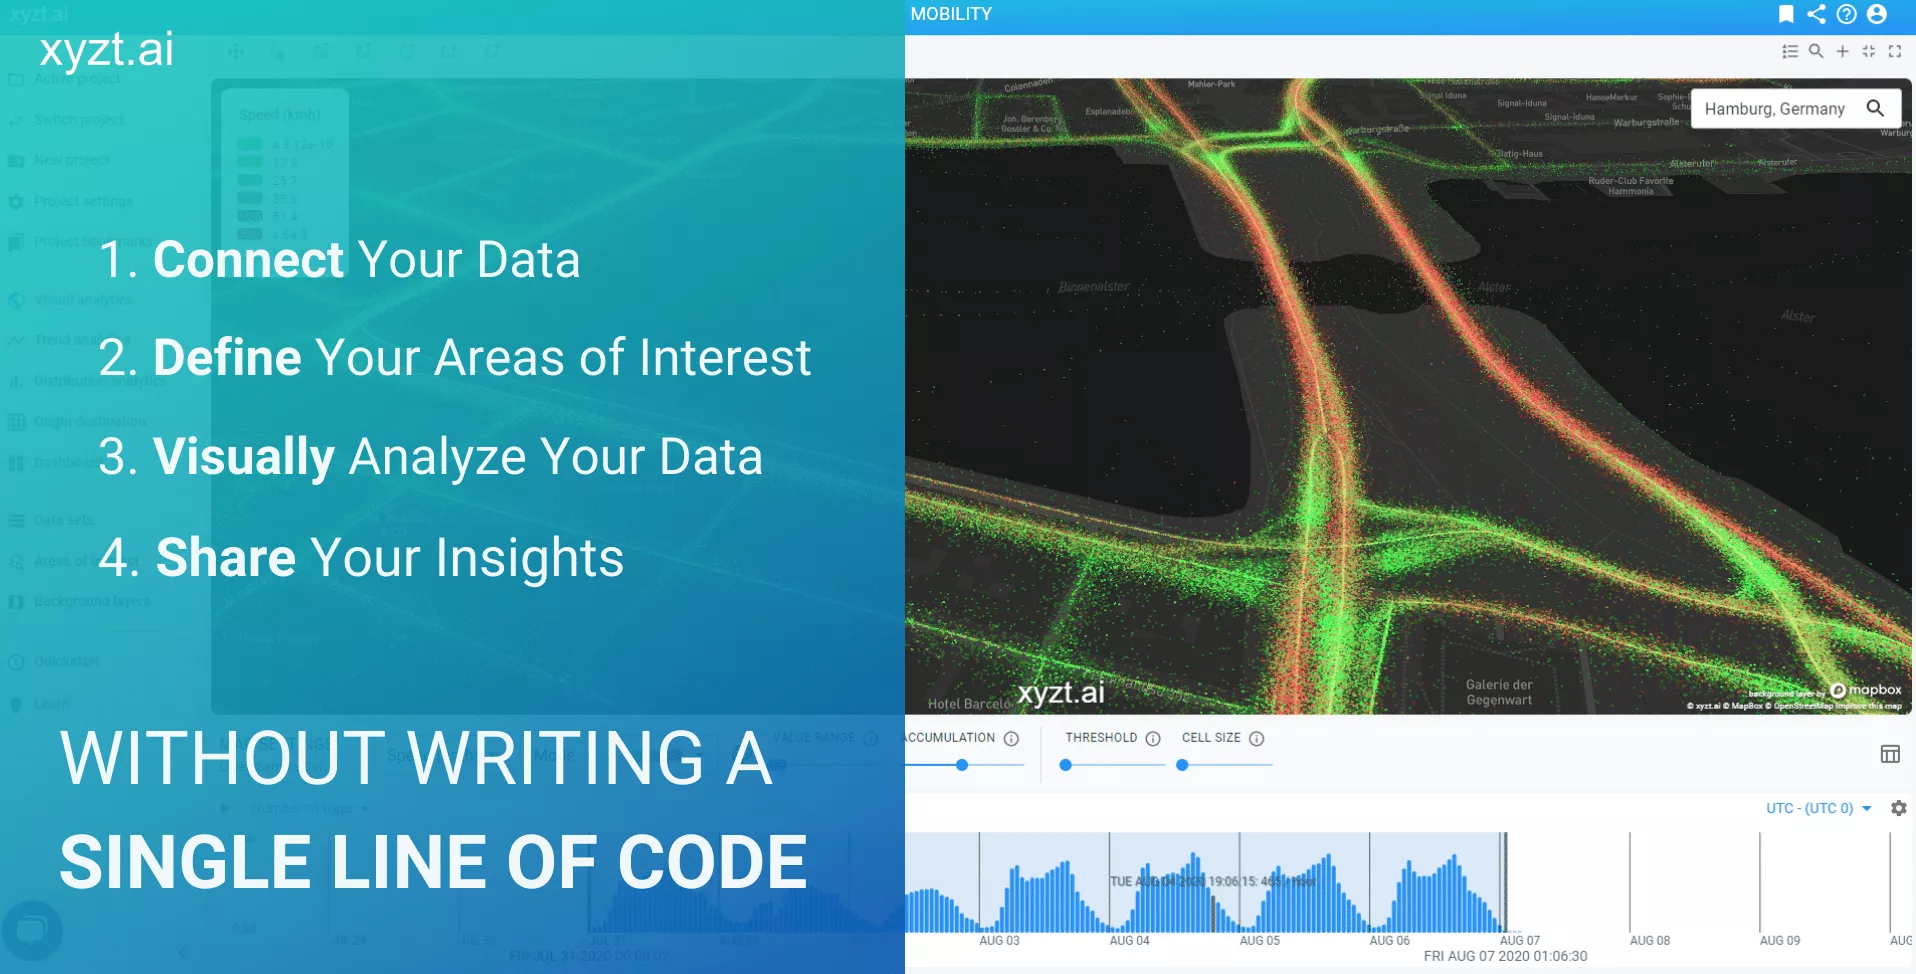 Mobility analytics software visualizing trips data by INRIX to analyze speed profiles in the city of Hamburg, Germany